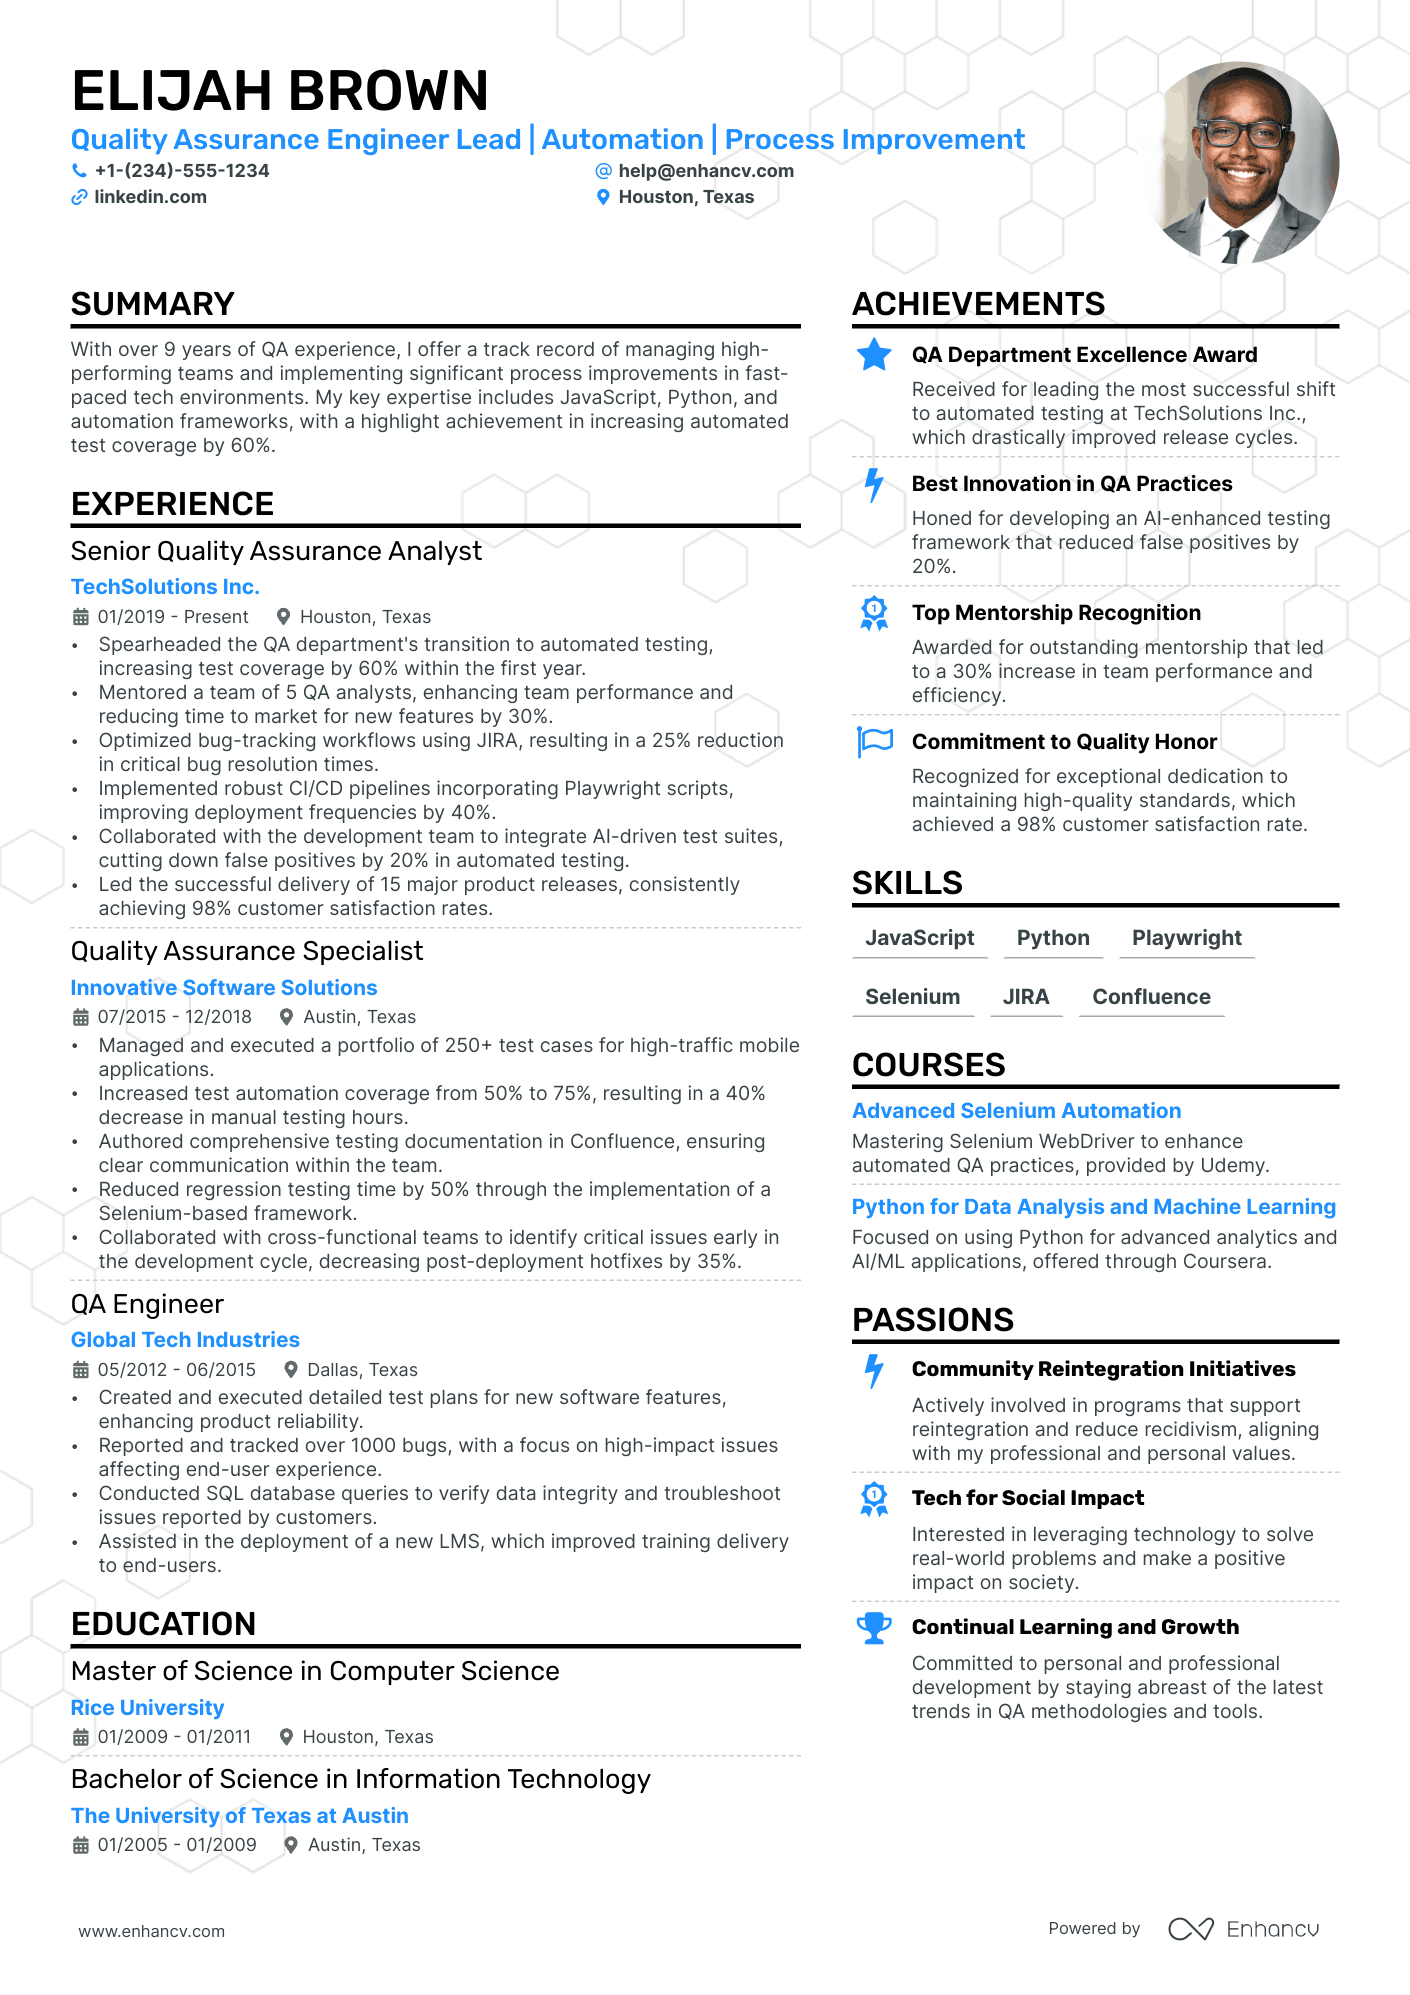 Quality Assurance Manager resume example